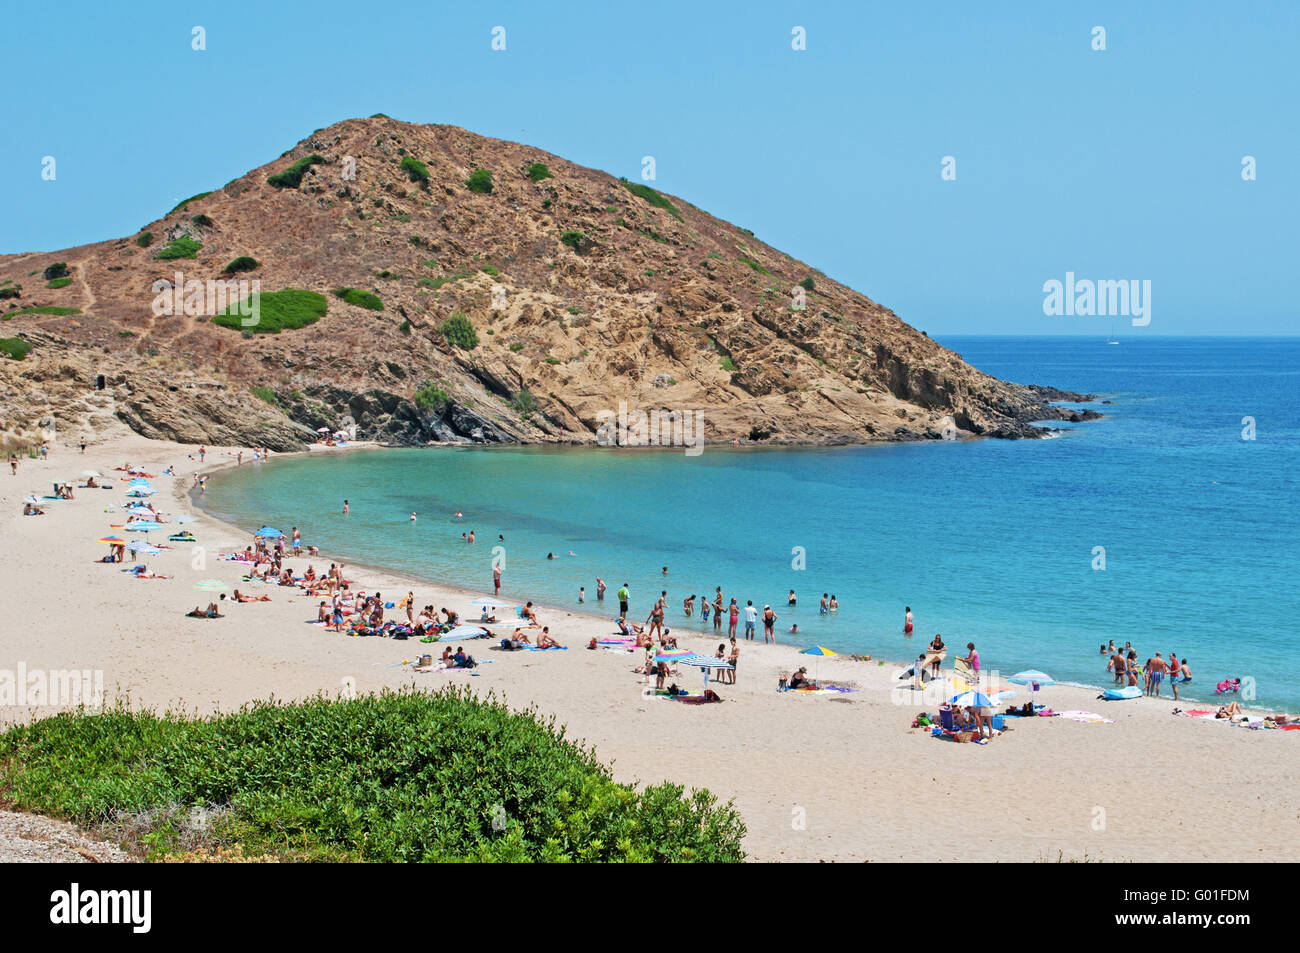 Menorca, Balearic Islands, Spain: panoramic view of the beach of Cala Mesquida with a sandy surface and surrounded by vegetation Stock Photo